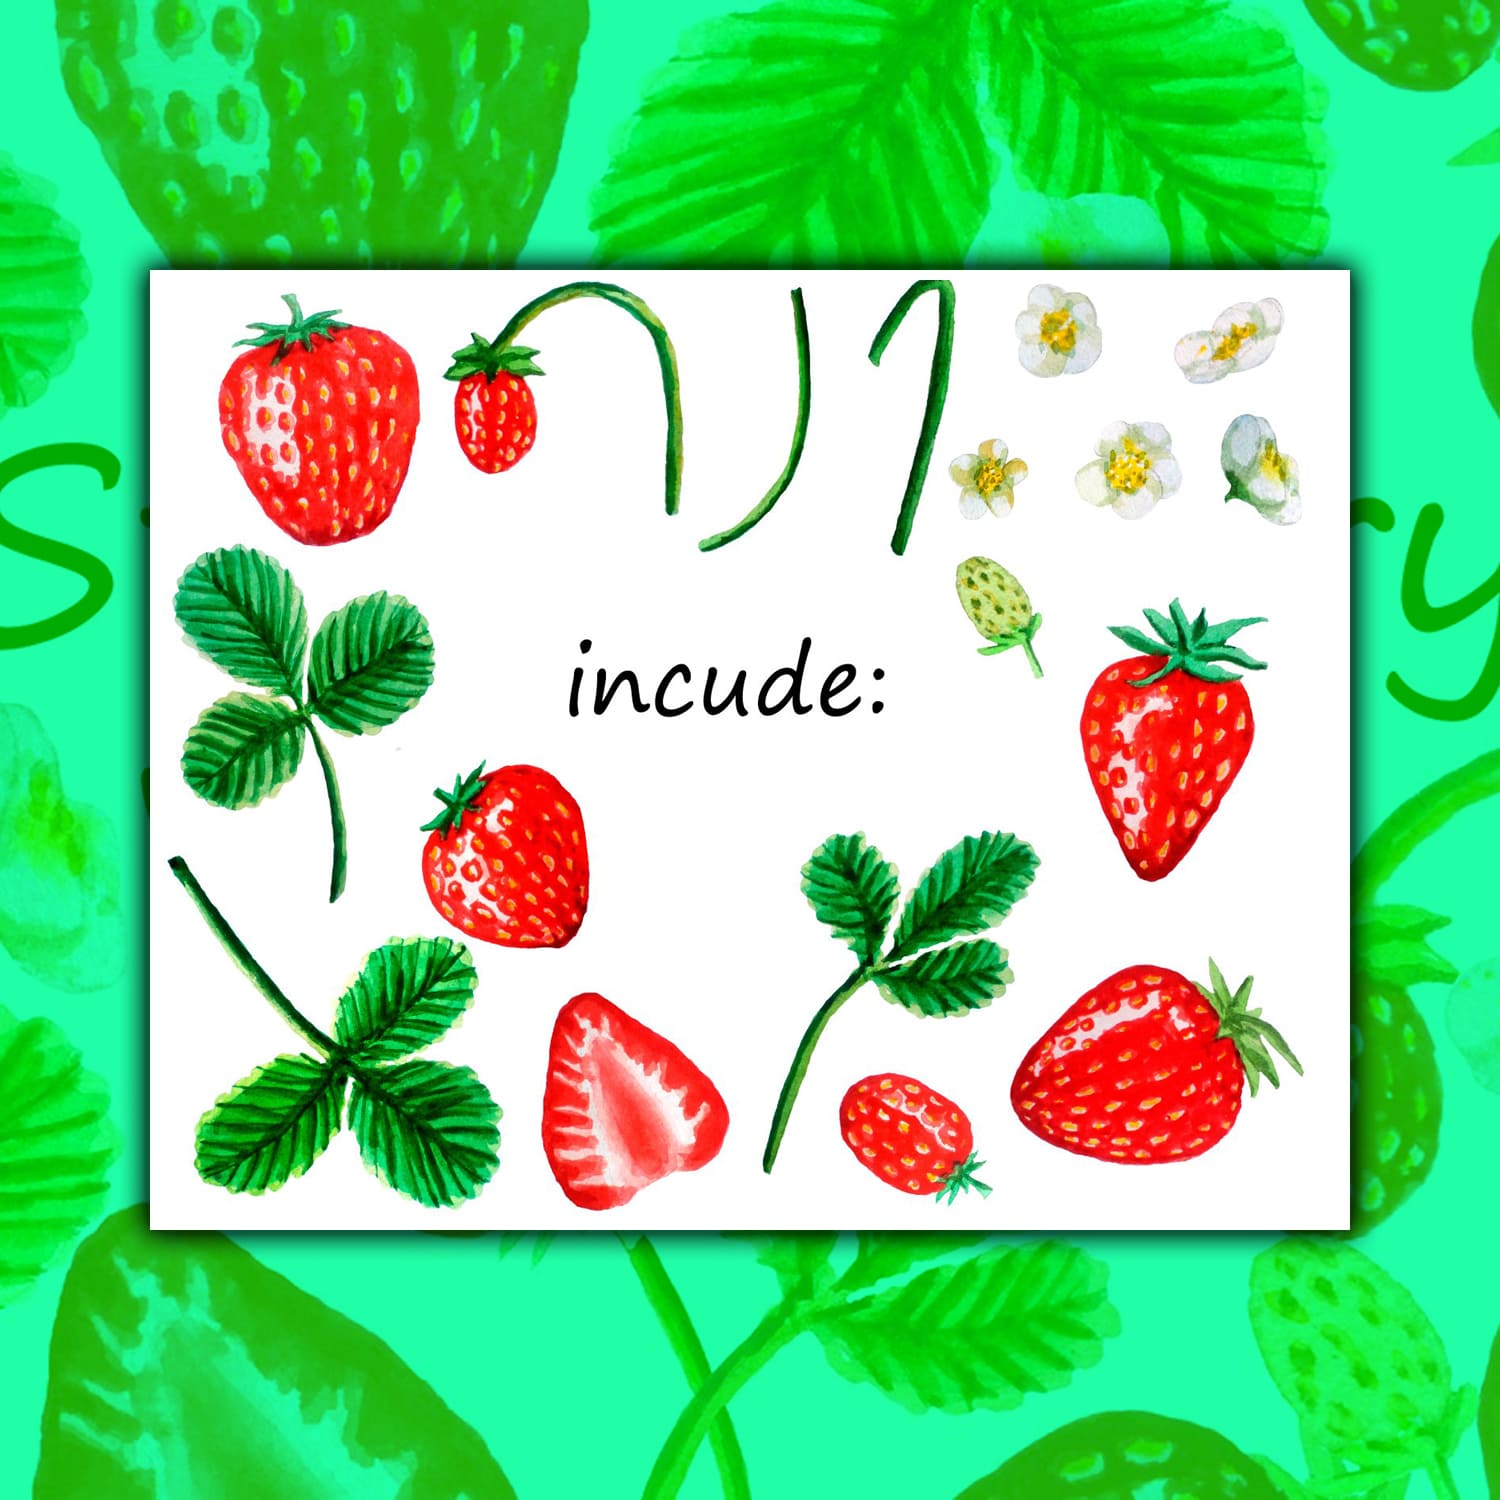 Slide with elements of watercolor strawberries on a green background.